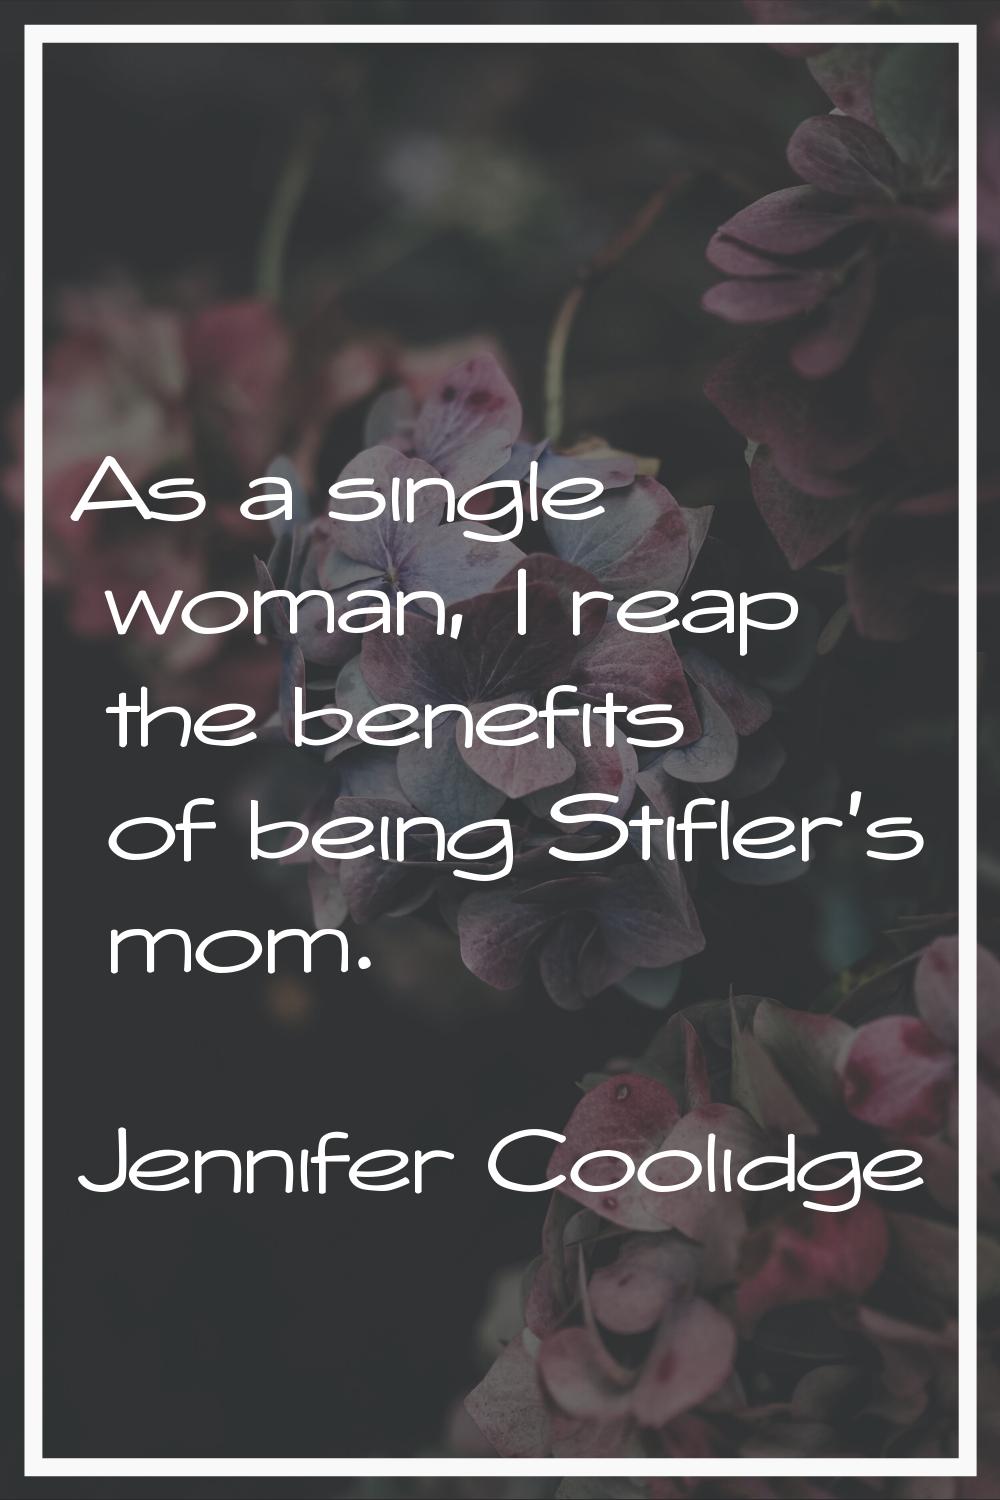 As a single woman, I reap the benefits of being Stifler's mom.